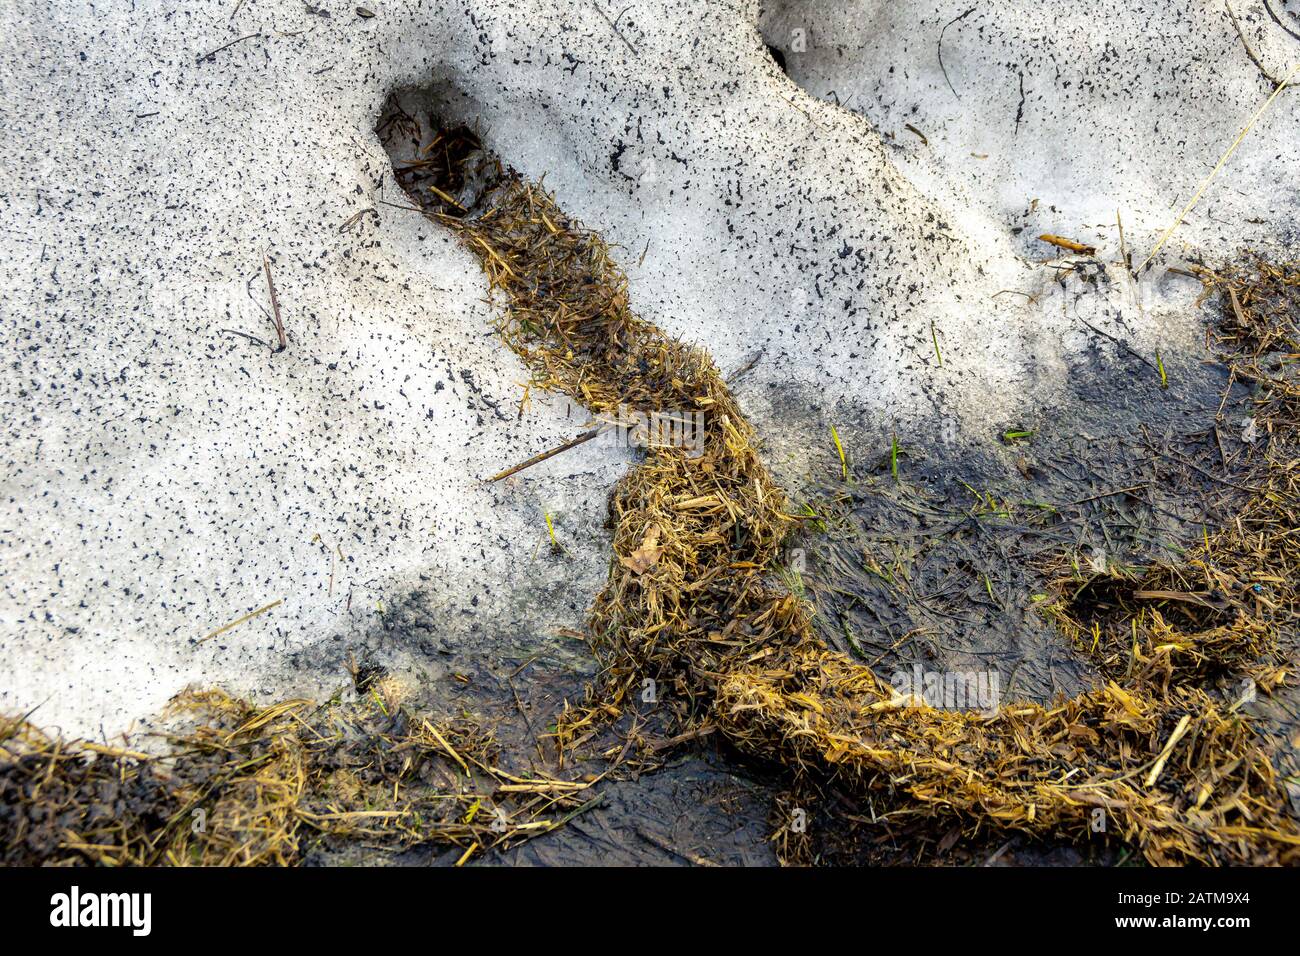 in a partially melted snowdrift, rodent burrows laid out for the winter with dry old grass, housing insulation for the winter, selective focus Stock Photo